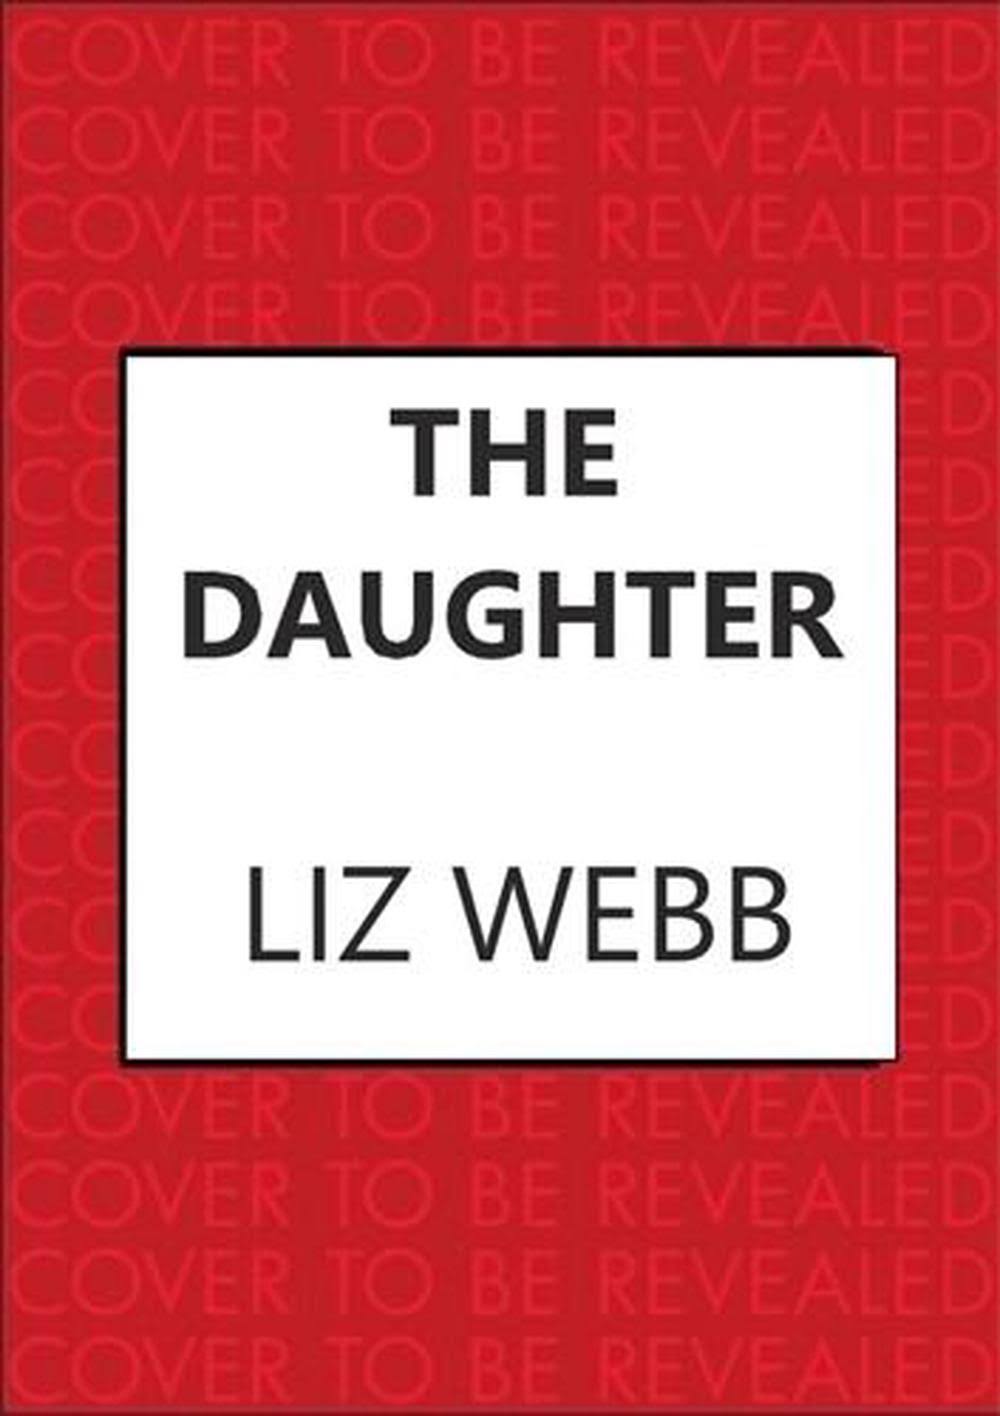 The Daughter [Book]